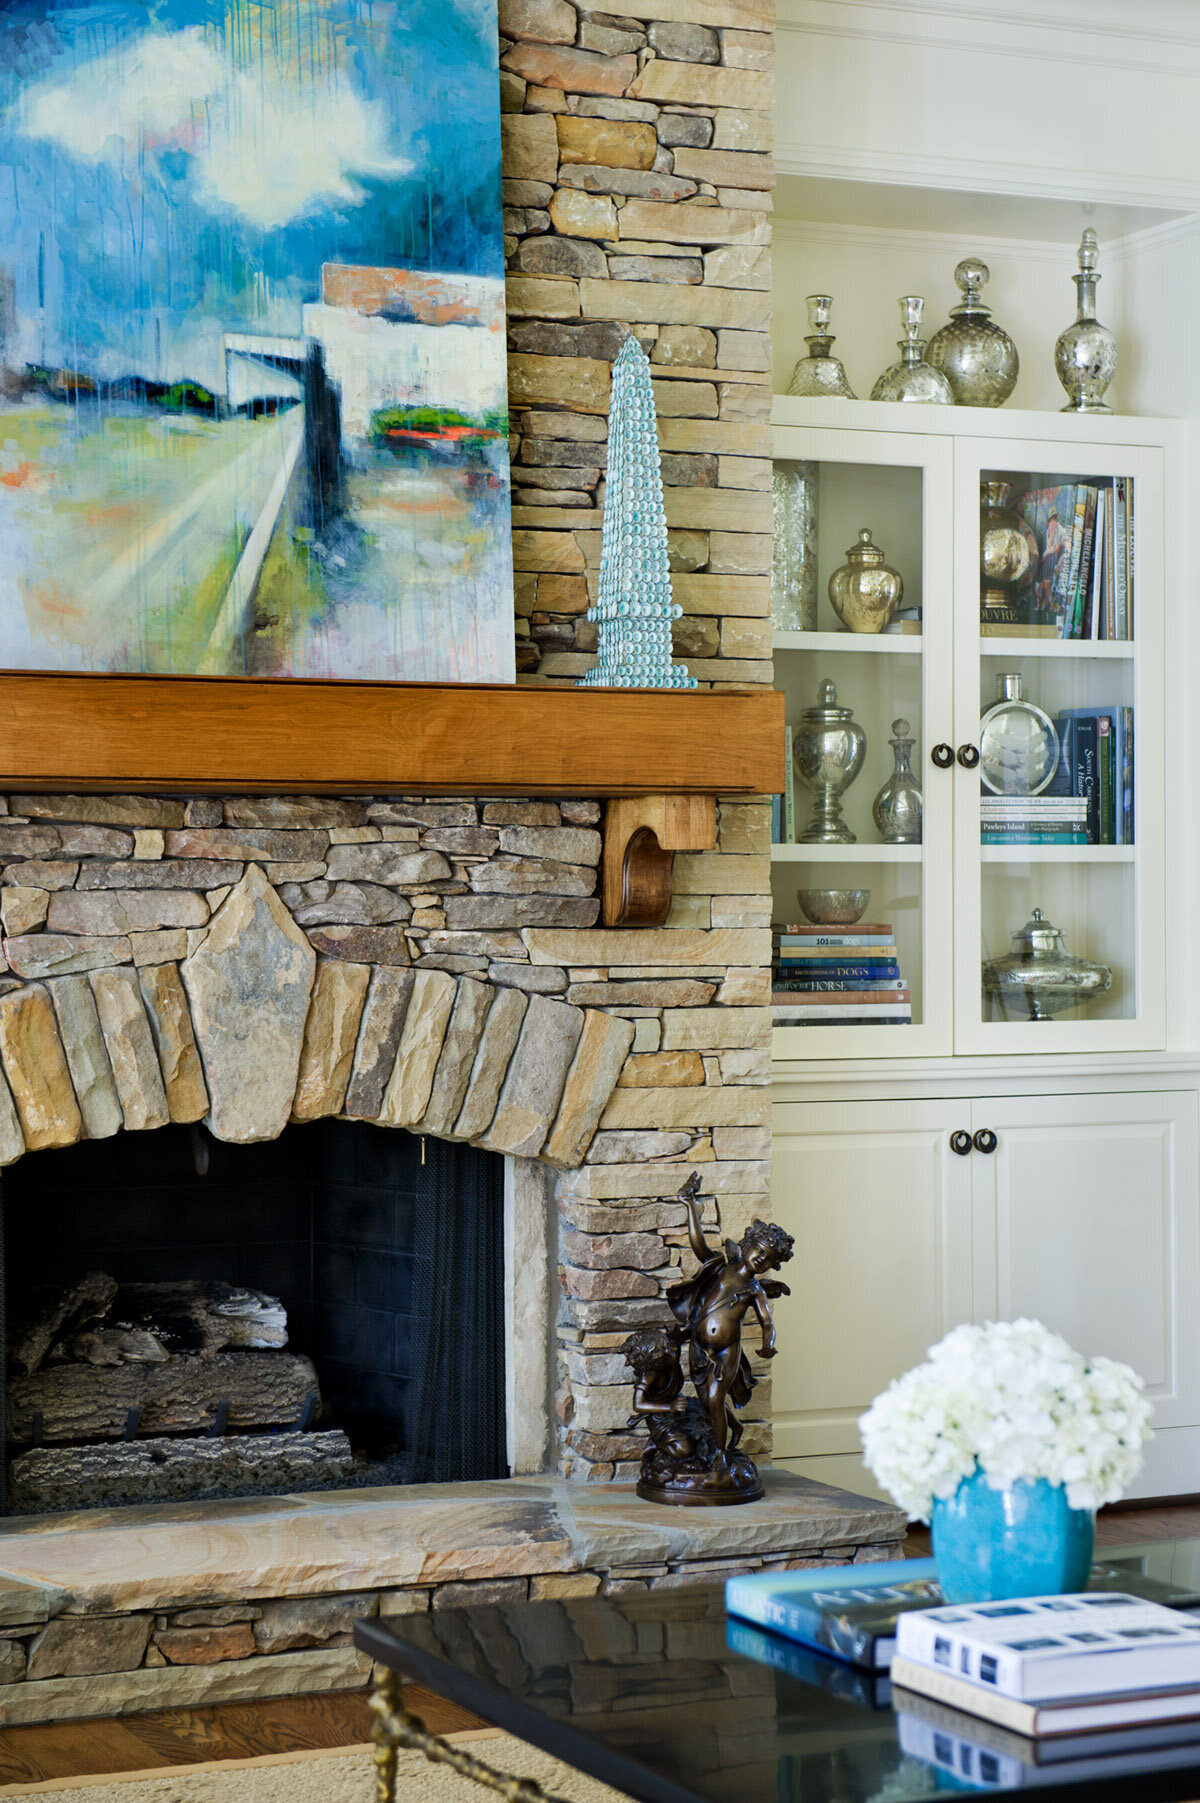 Services | Panageries: Interior Design in Greenville SC